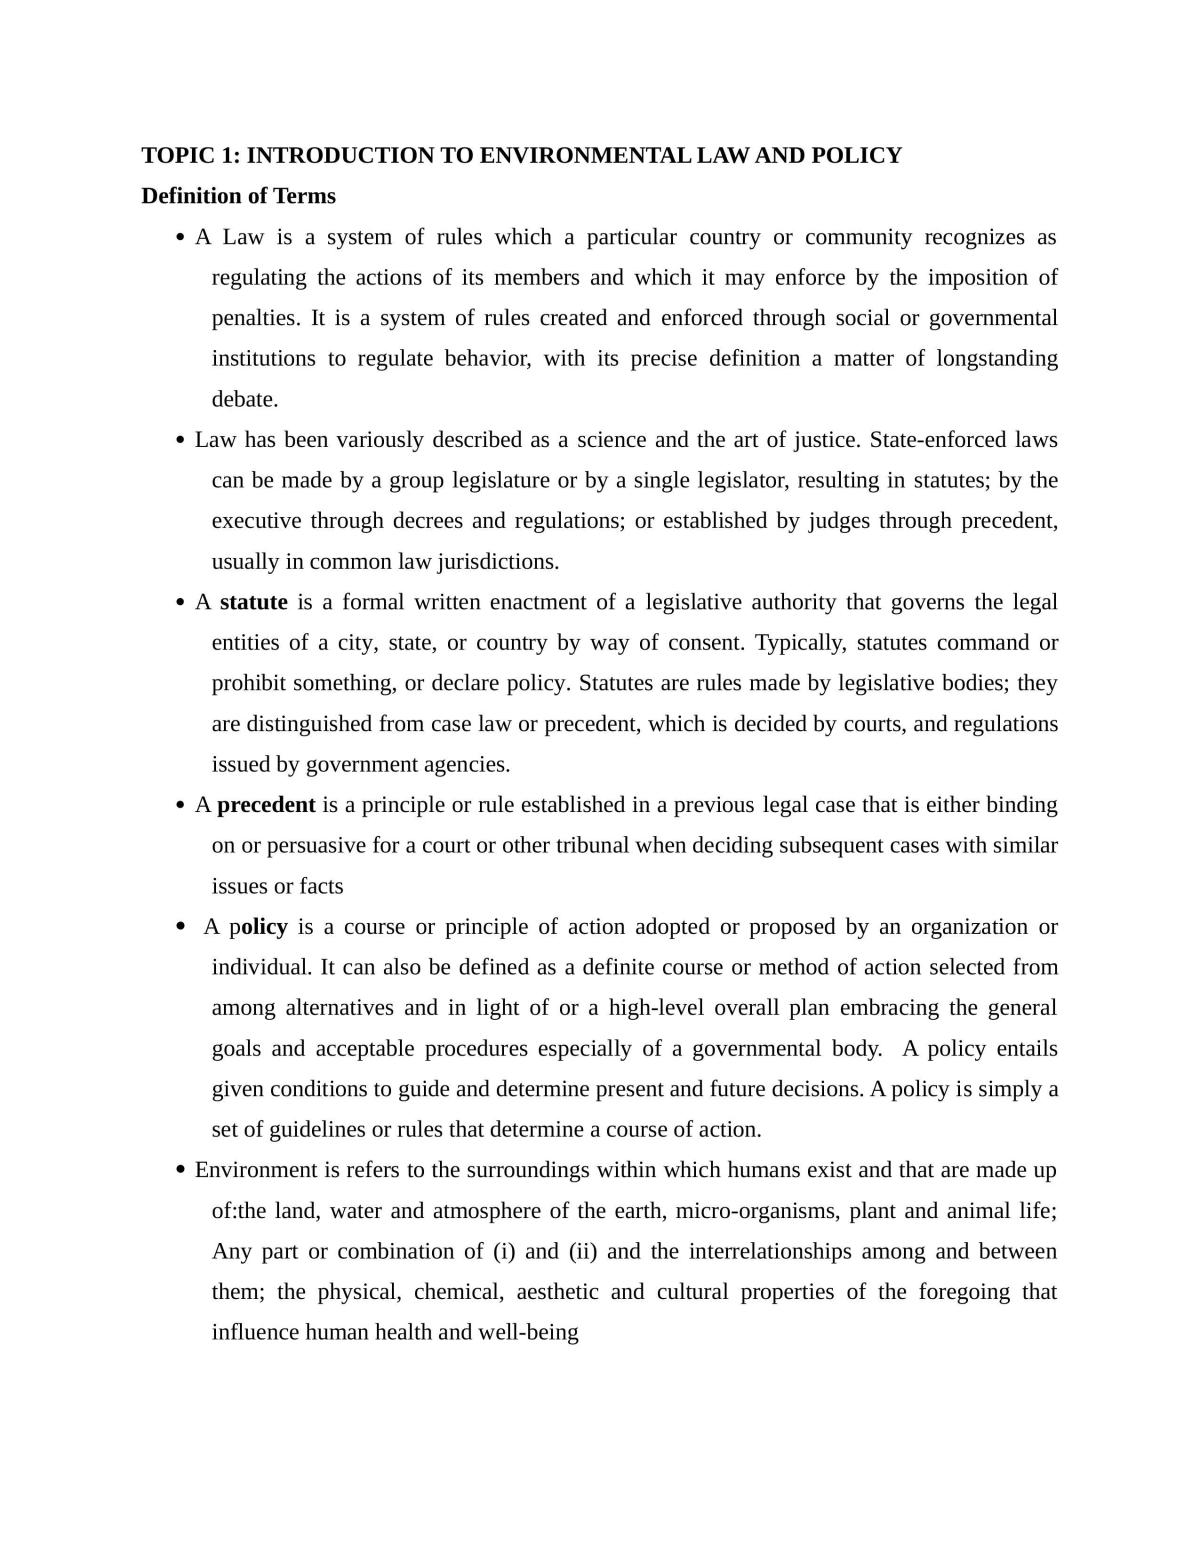 Environmental Law and Policy Notes - Page 1